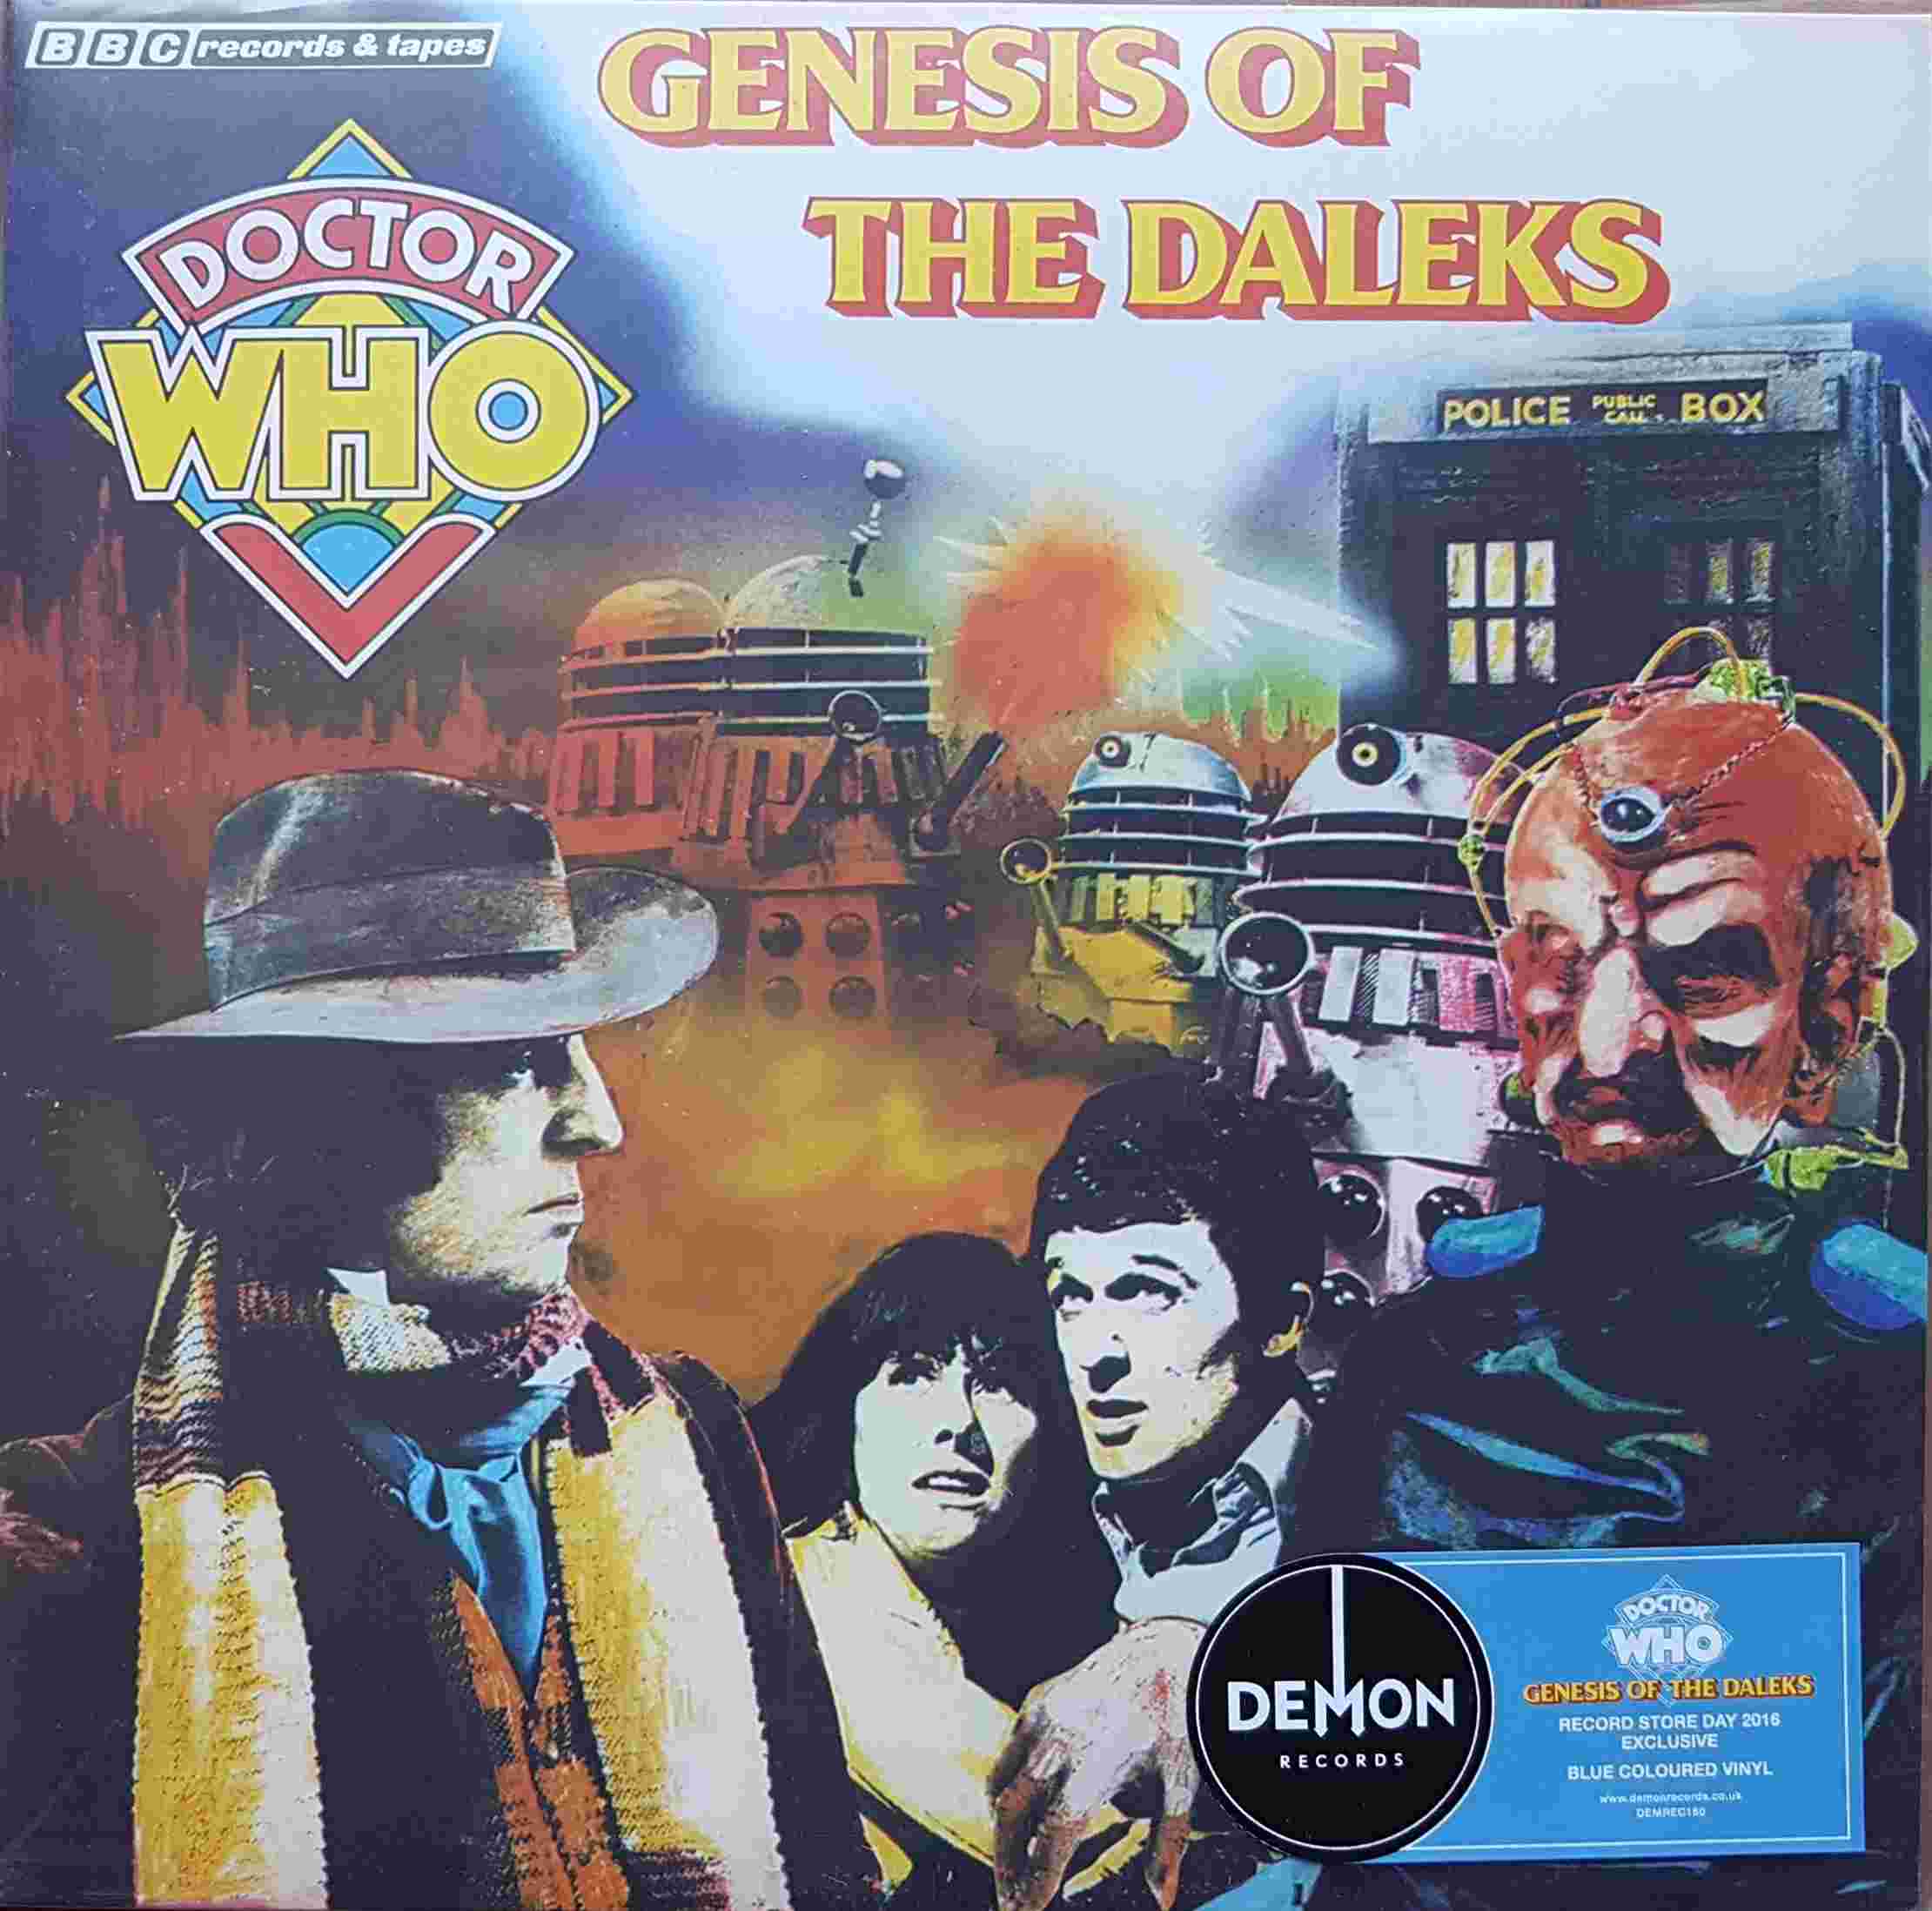 Picture of DEMREC 160 Doctor Who - Genesis of the Daleks - Limited edition blue vinyl - Record Store Day 2016 by artist Terry Nation from the BBC albums - Records and Tapes library